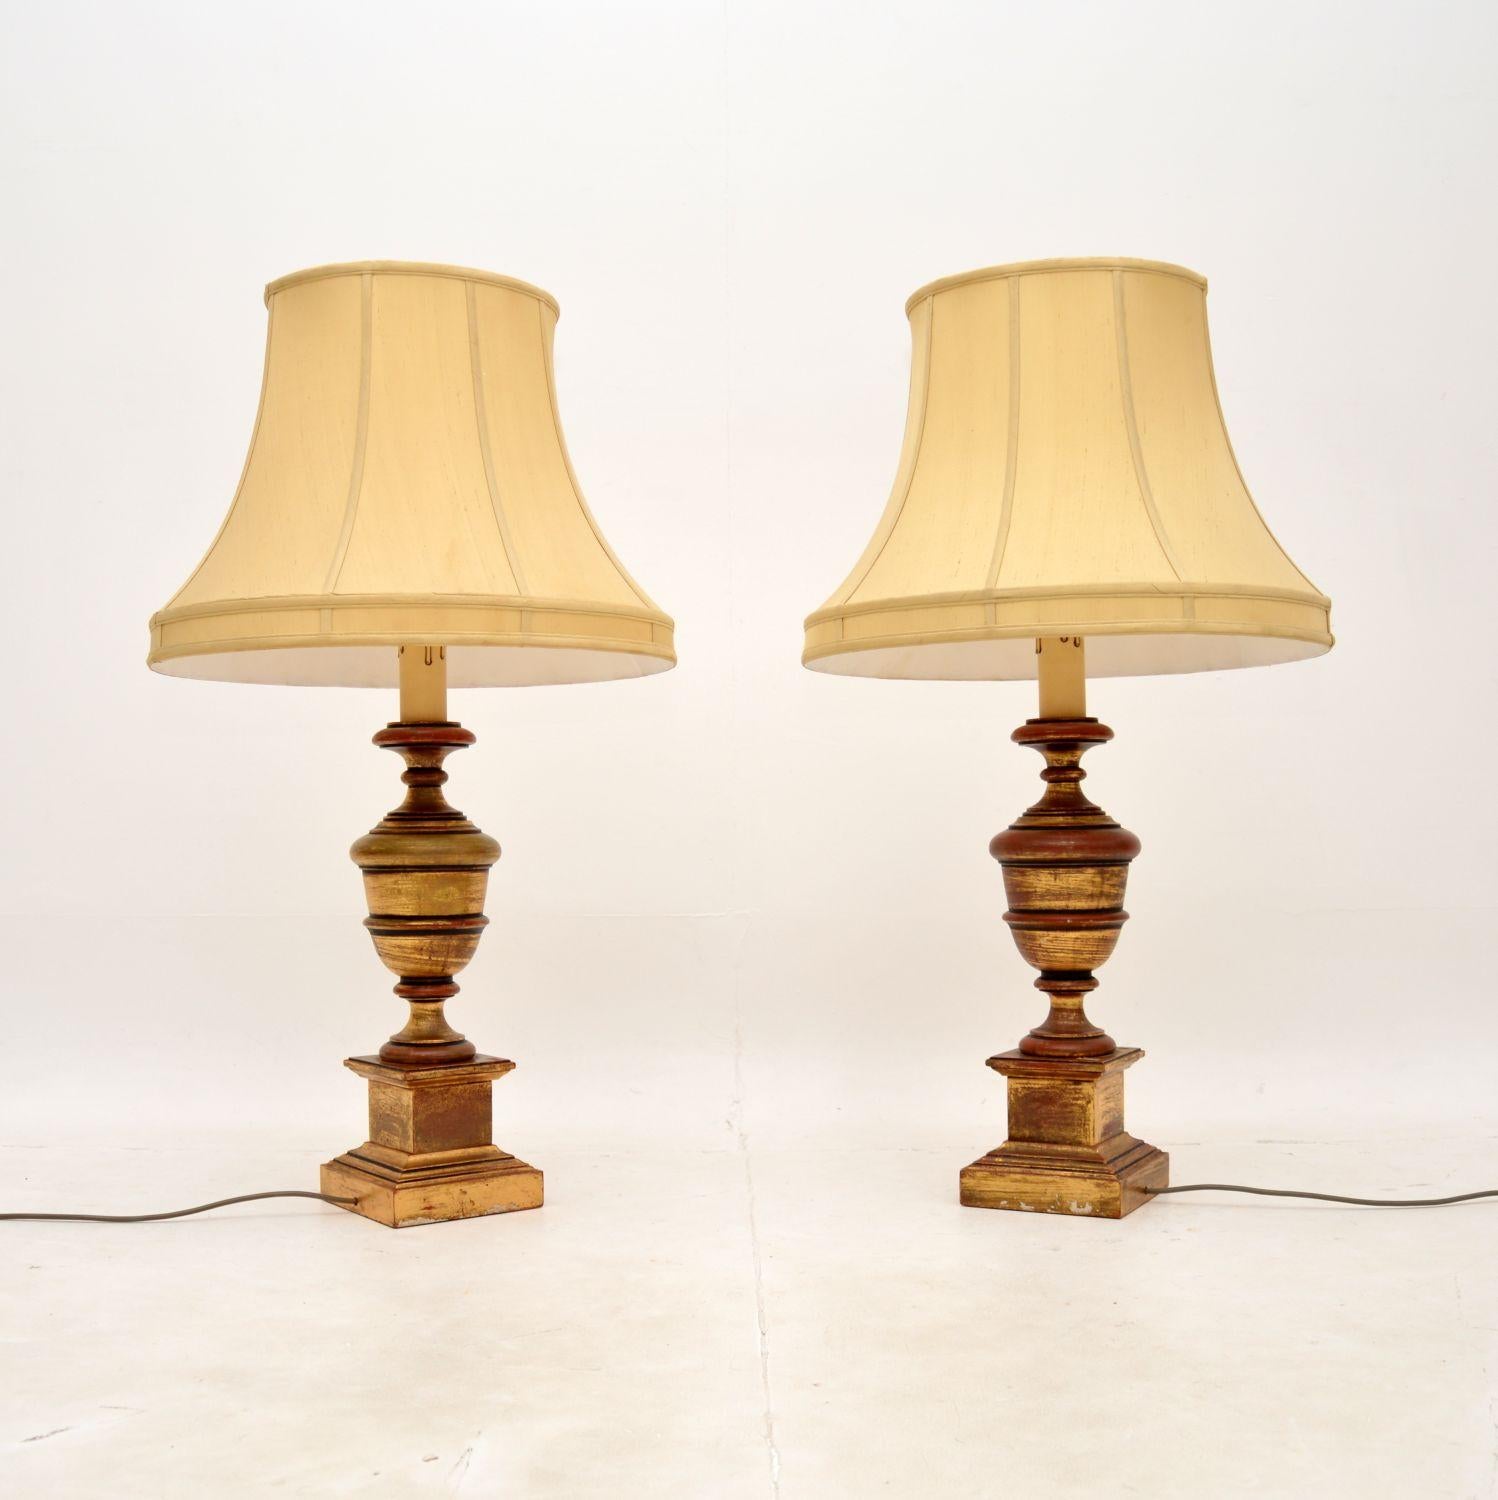 An absolutely stunning, large and impressive pair of antique gilt wood table lamps. They were made in England, they date from around the 1930-50’s.

The quality is outstanding, they are made from beautifully turned solid wood and have a gorgeous